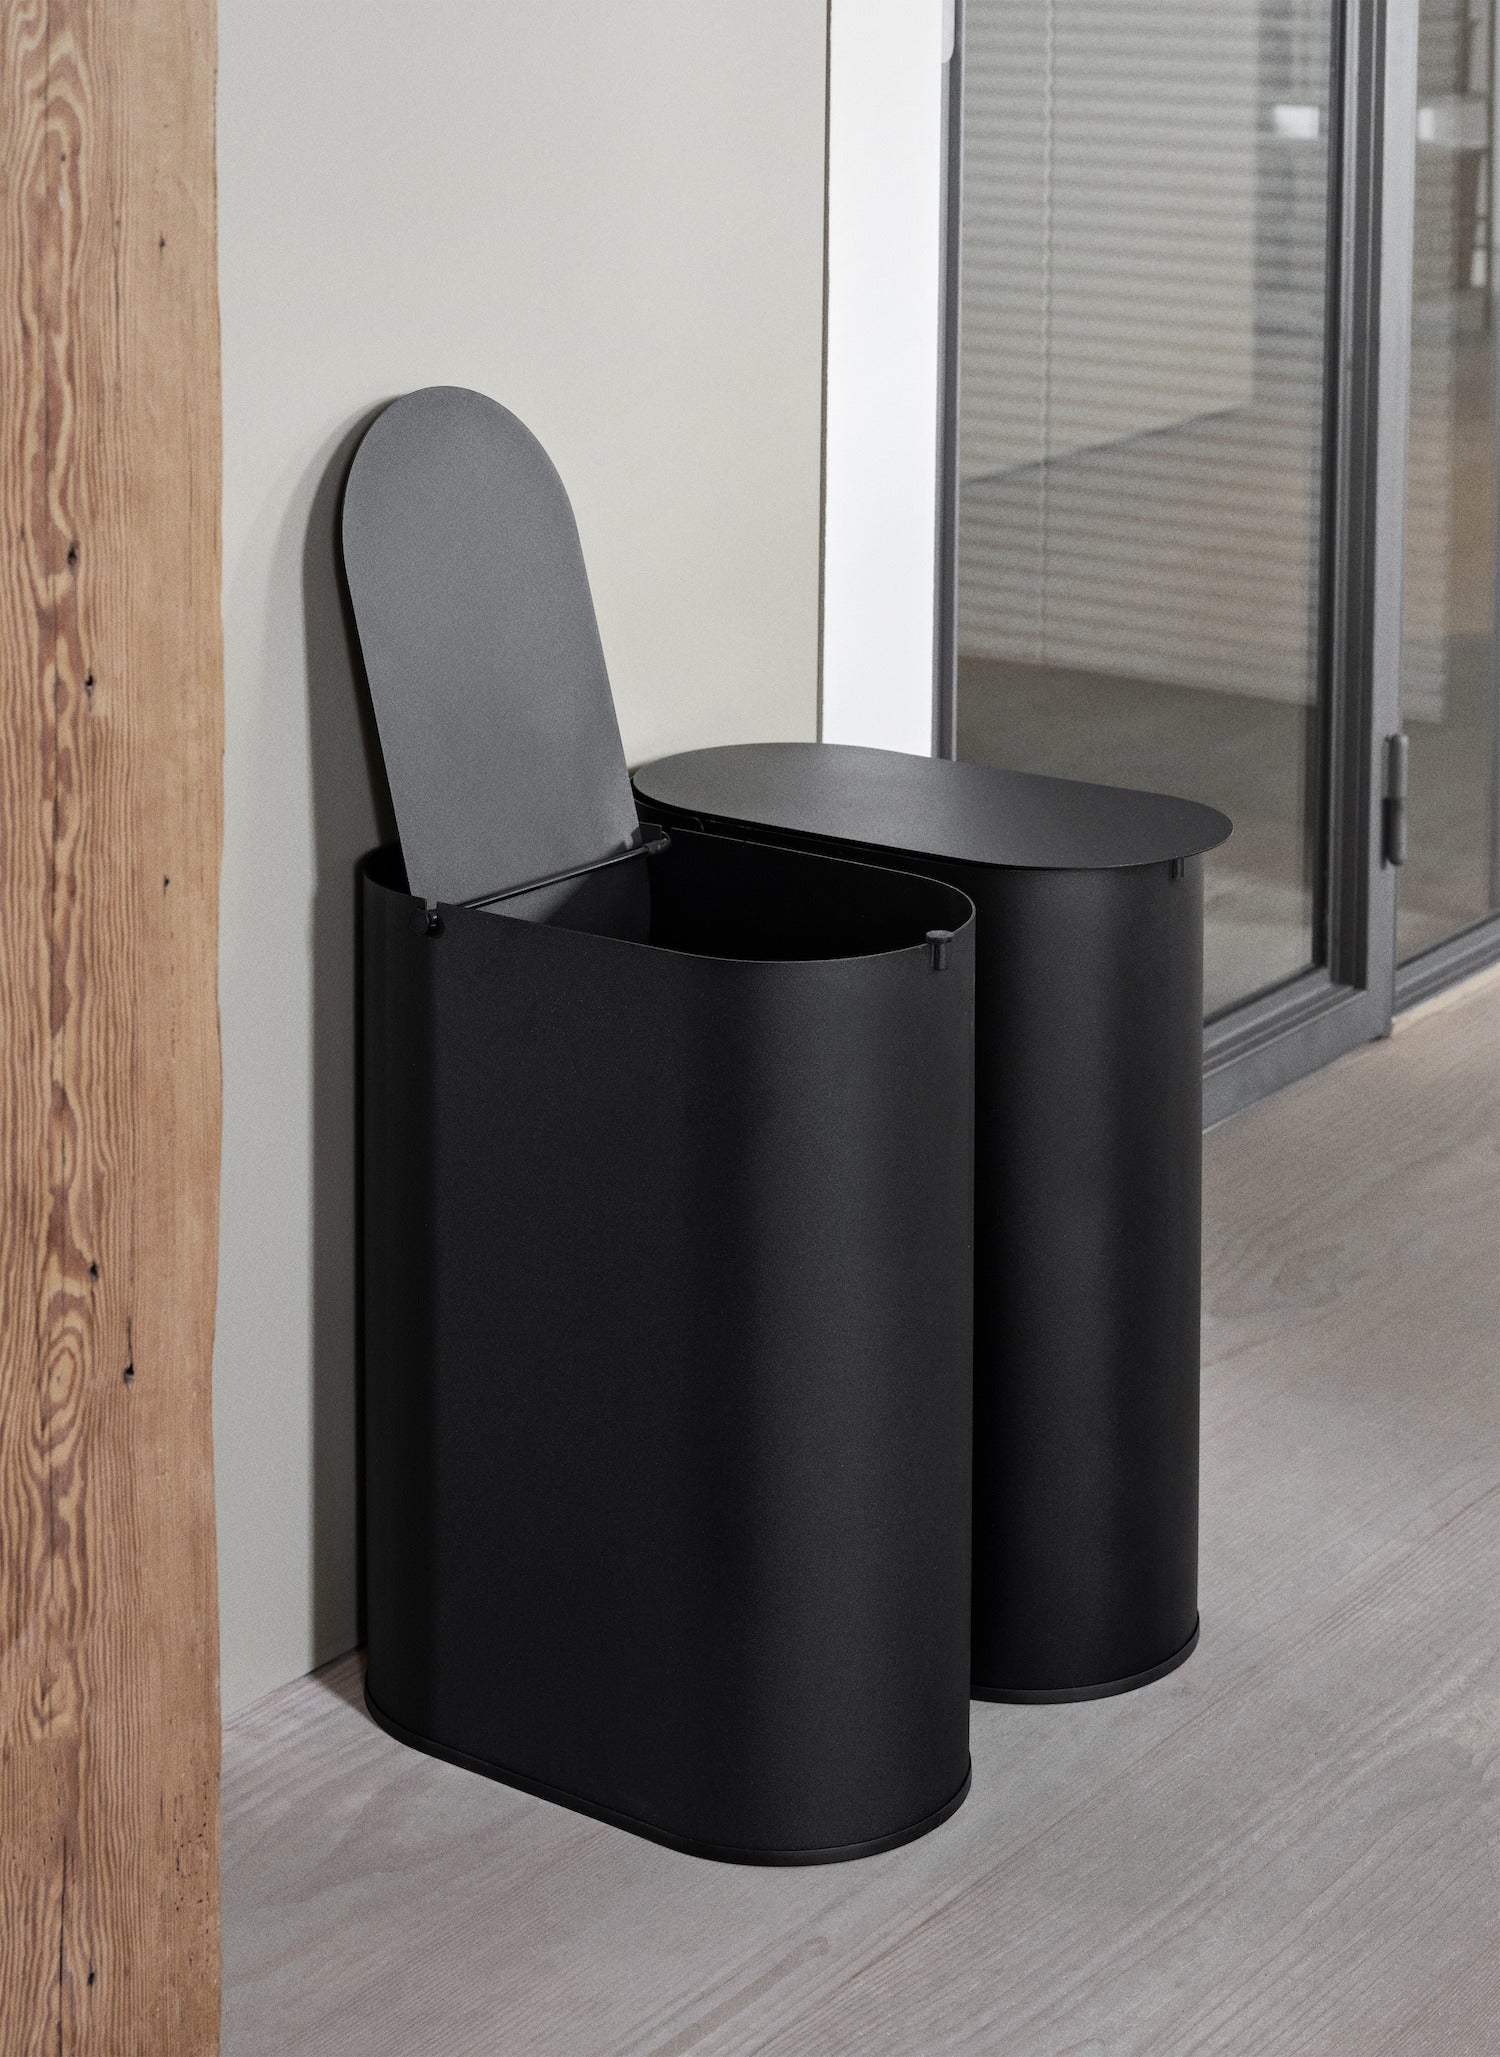 Enkel Bin. With a name derived from the Danish word for simple, the functional Enkel Bin offers an aesthetic solution to helping you sort your daily household waste while keeping the kitchen looking clean and tidy. 